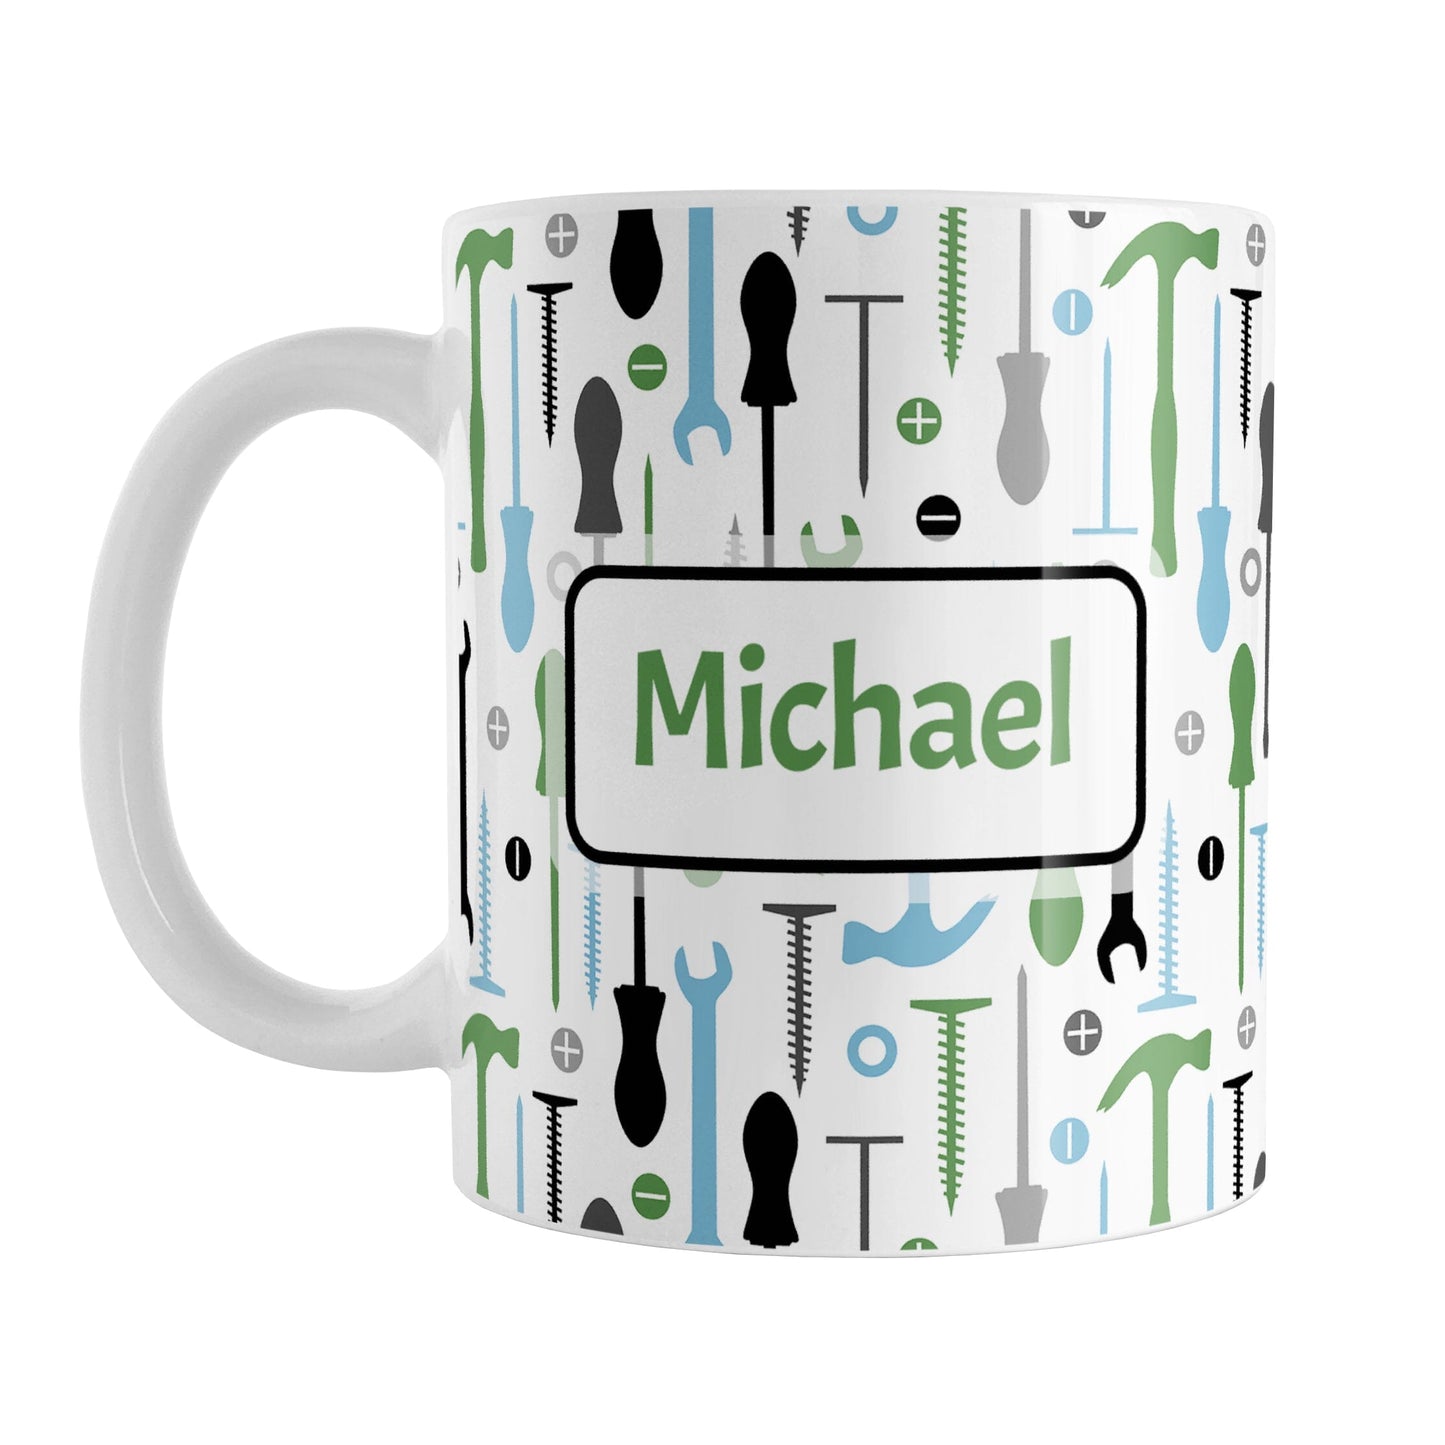 Personalized Green Blue Tools Pattern Mug (11oz) at Amy's Coffee Mugs. A ceramic coffee mug with a modern style pattern of tools in green, blue, black, and gray over white that wraps around the mug to the handle. Perfect for any handyman or contractor.  Your name is printed in a green font on both sides of the mug over the tools pattern. 